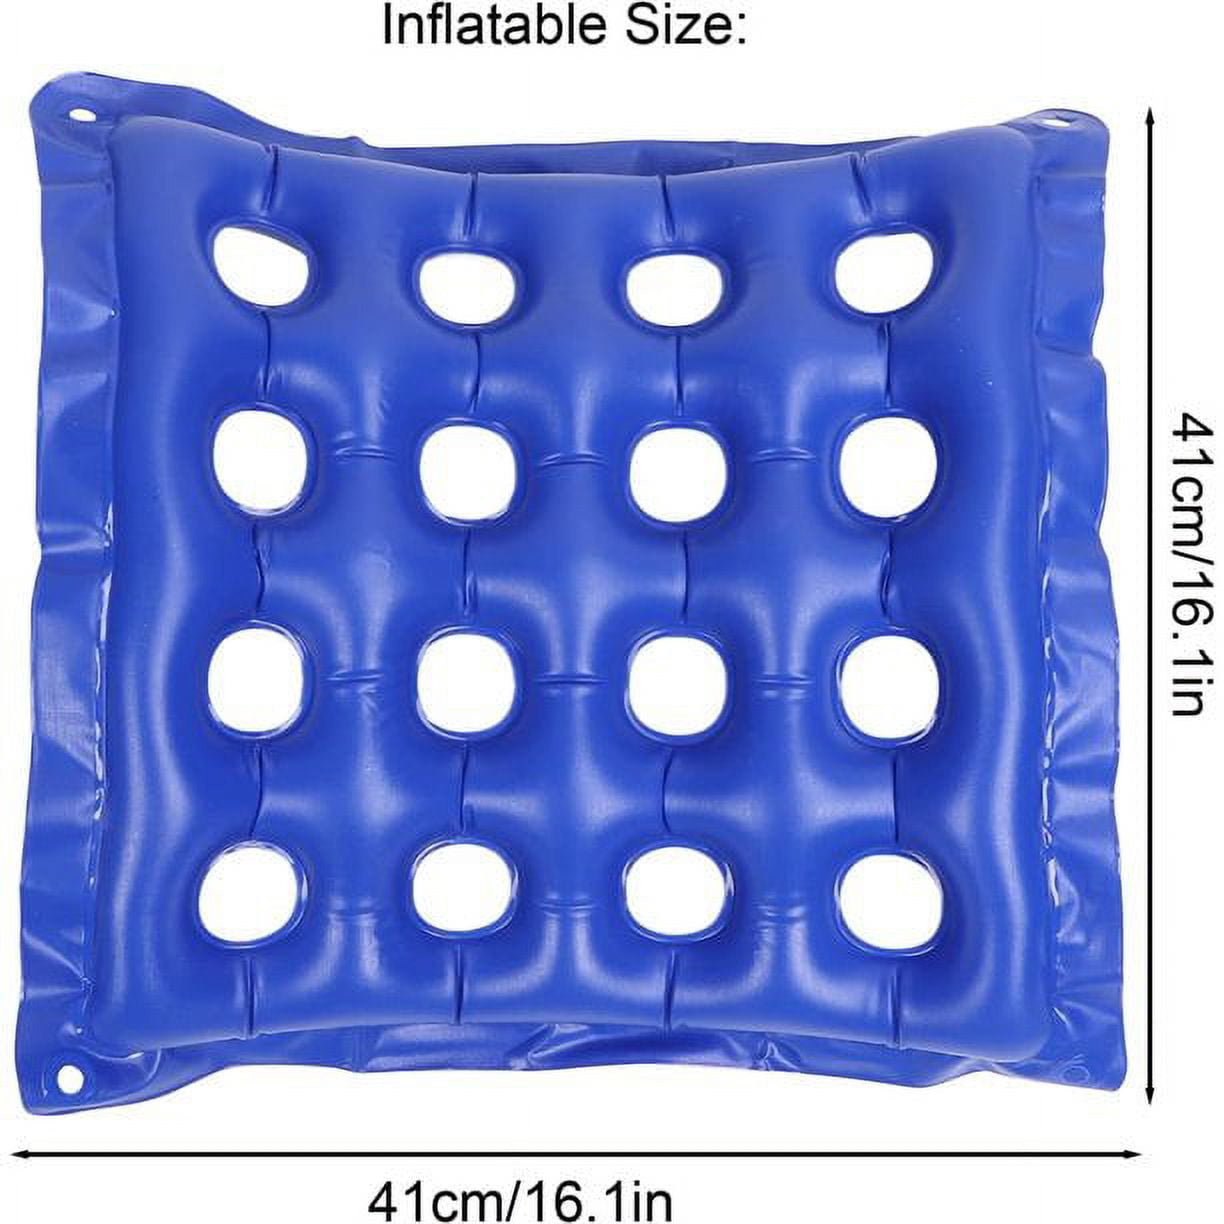 cygeall Inflatable Seat Cushions for Pressure Relief, Wheelchair Air Cushion for Bed Sore, Ideal for Prolonged Sitting 17.7 x 17.7